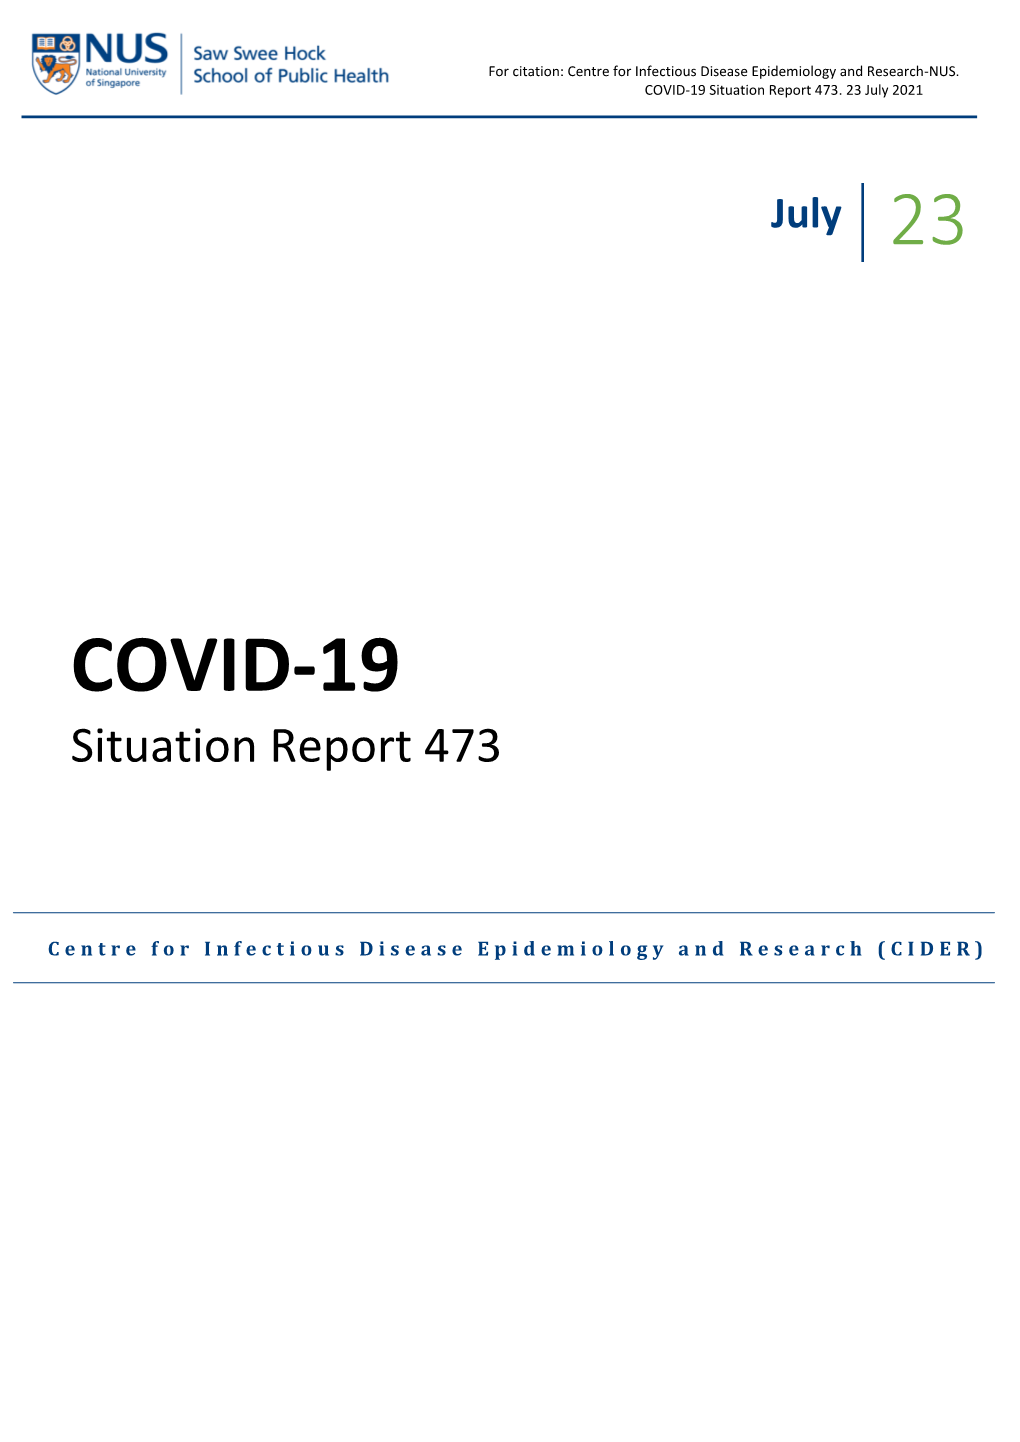 COVID-19 Situation Report 473